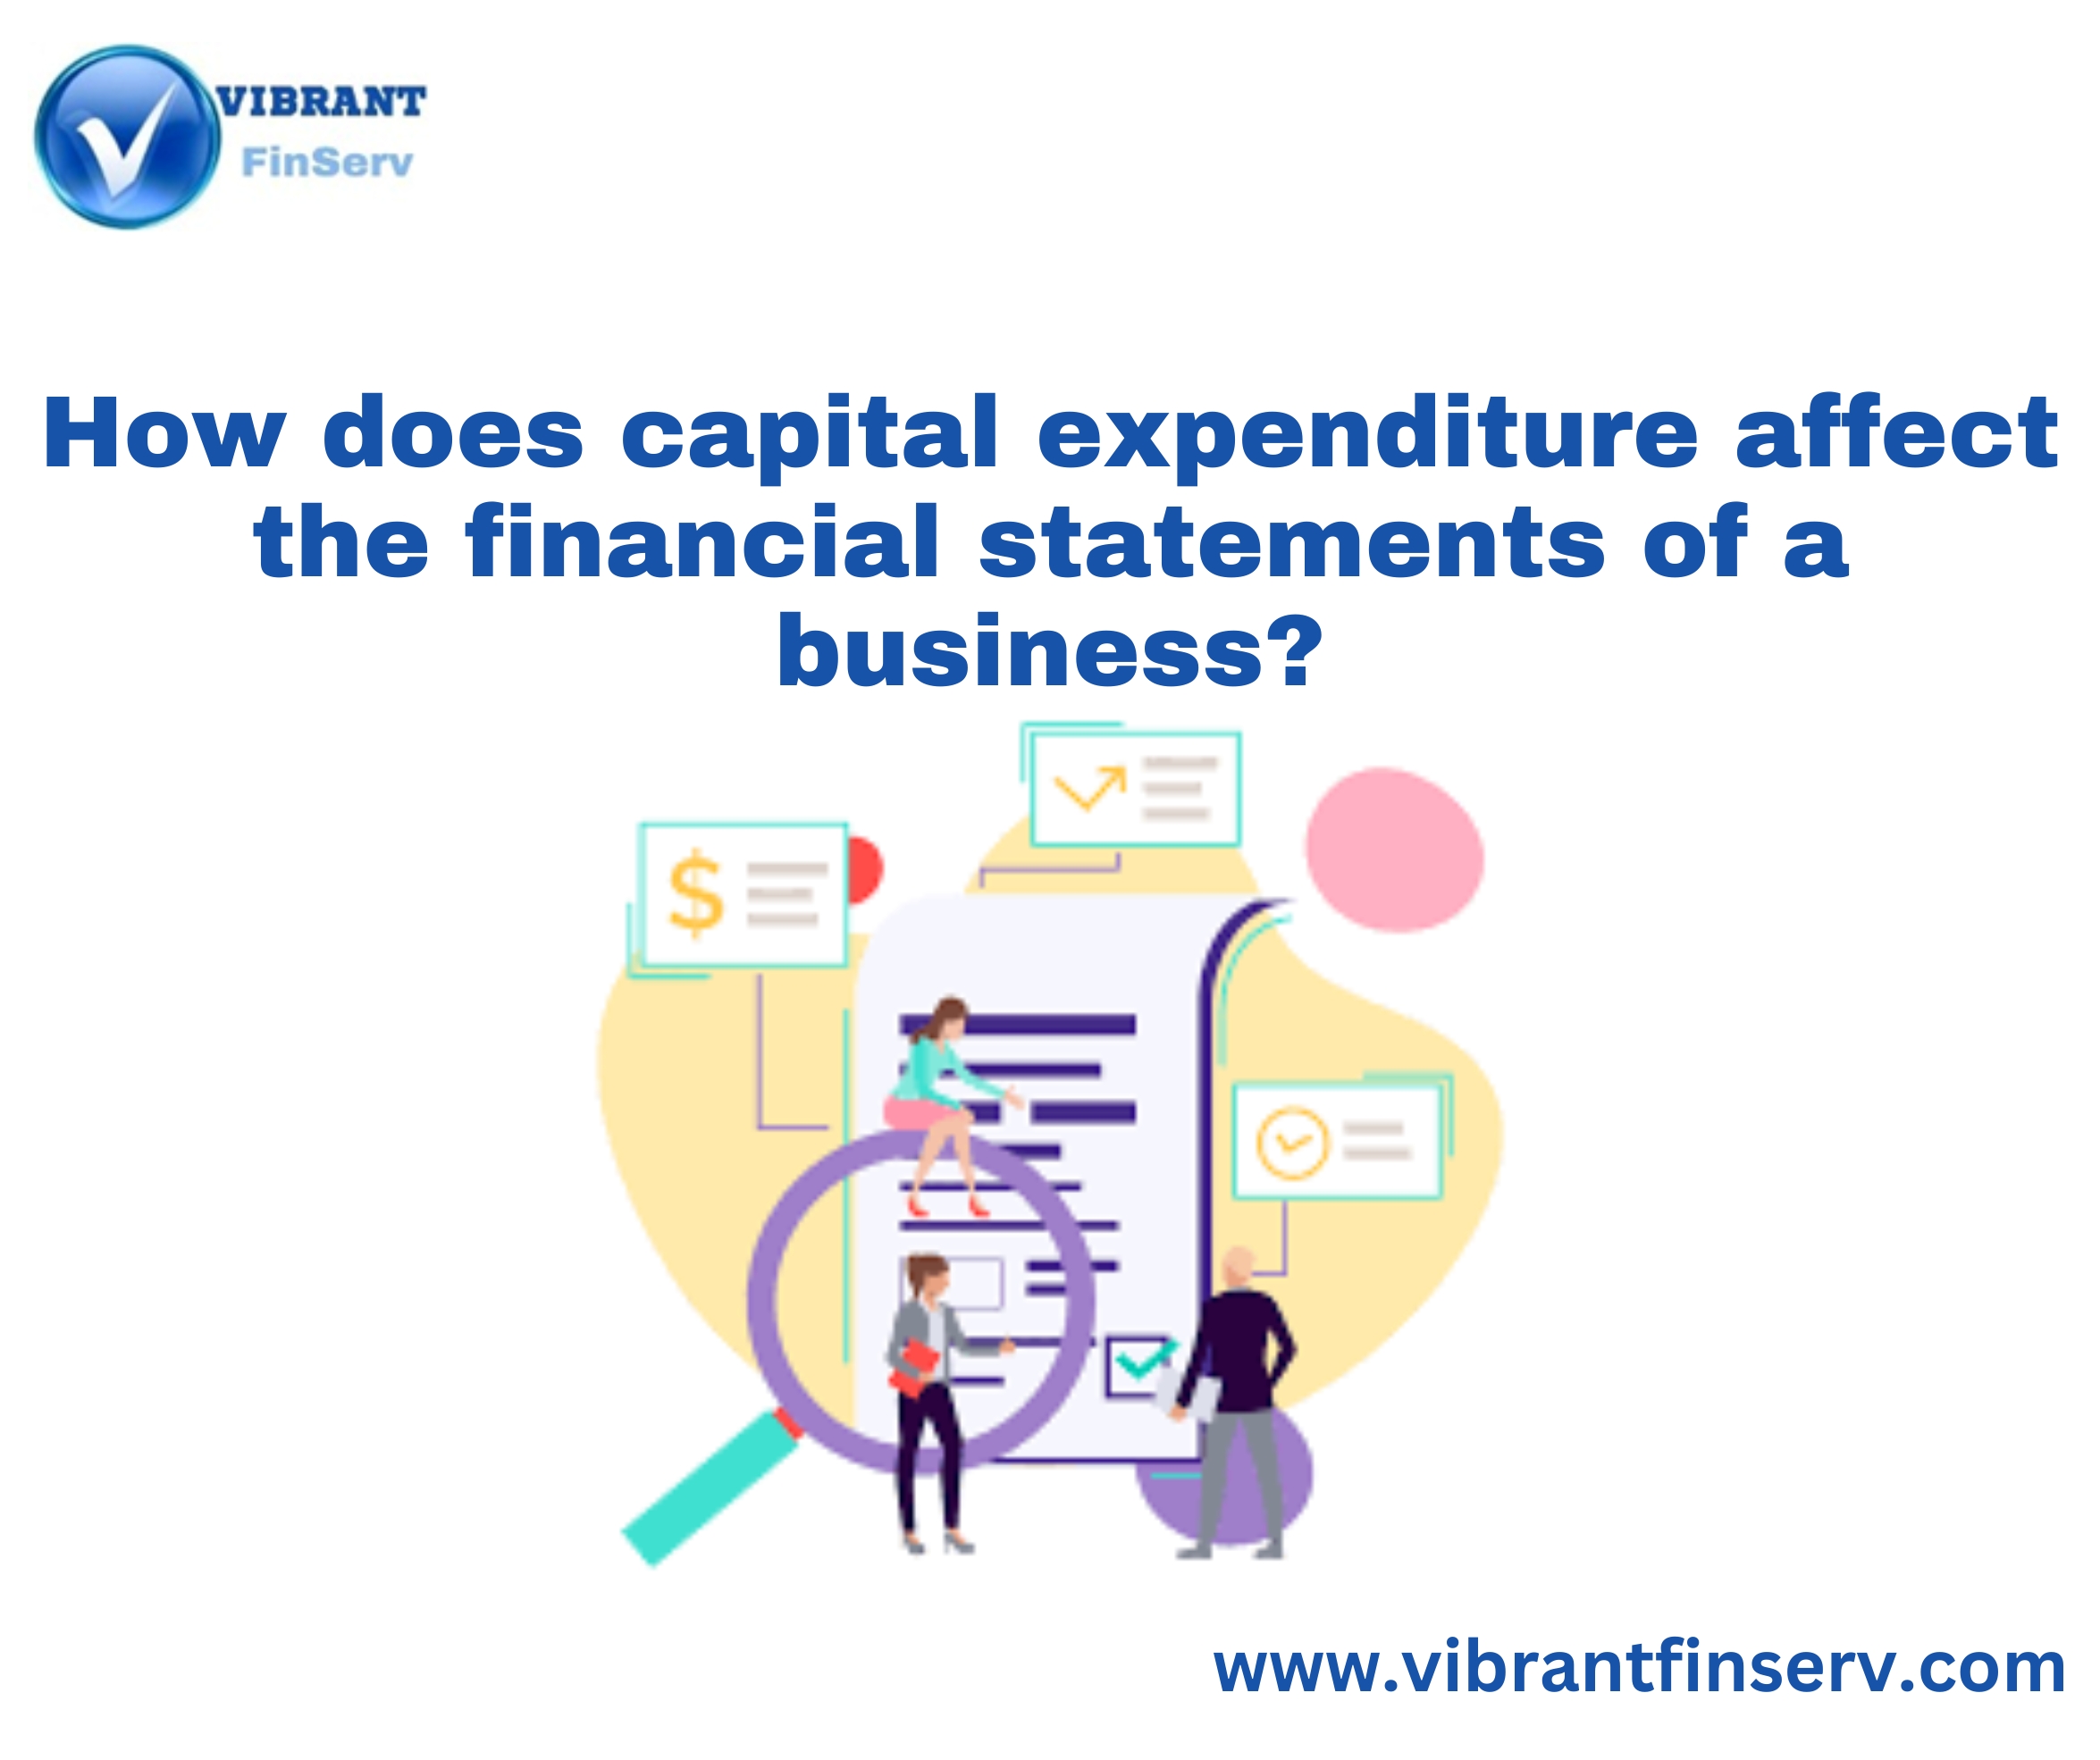 Capital expenditure affect the financial statements